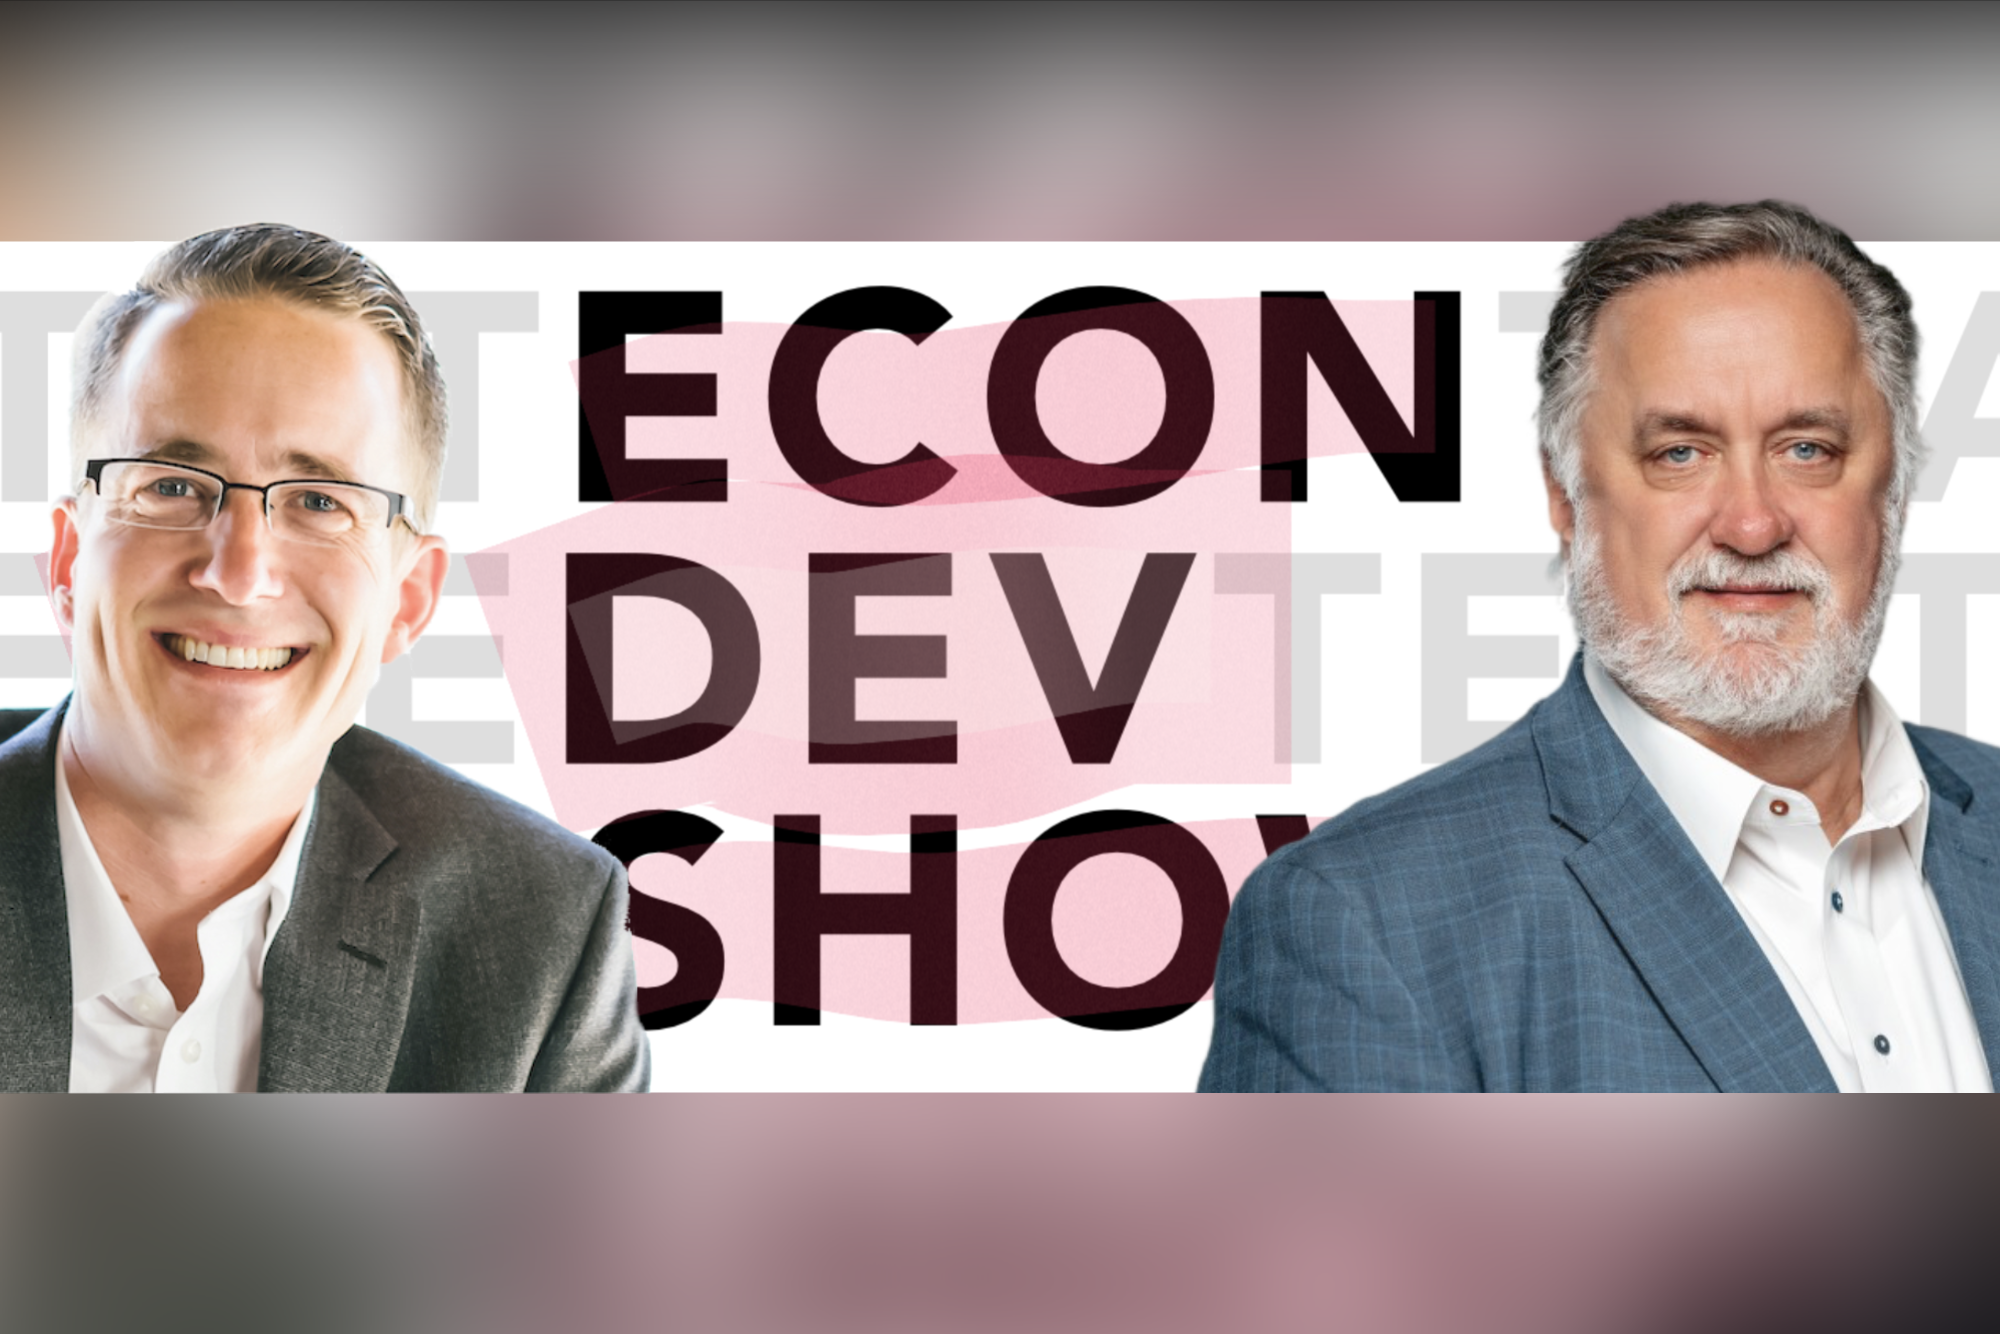 Podcast #81 - Climate Change: An Opportunity for Economic Development with Martin Vanags